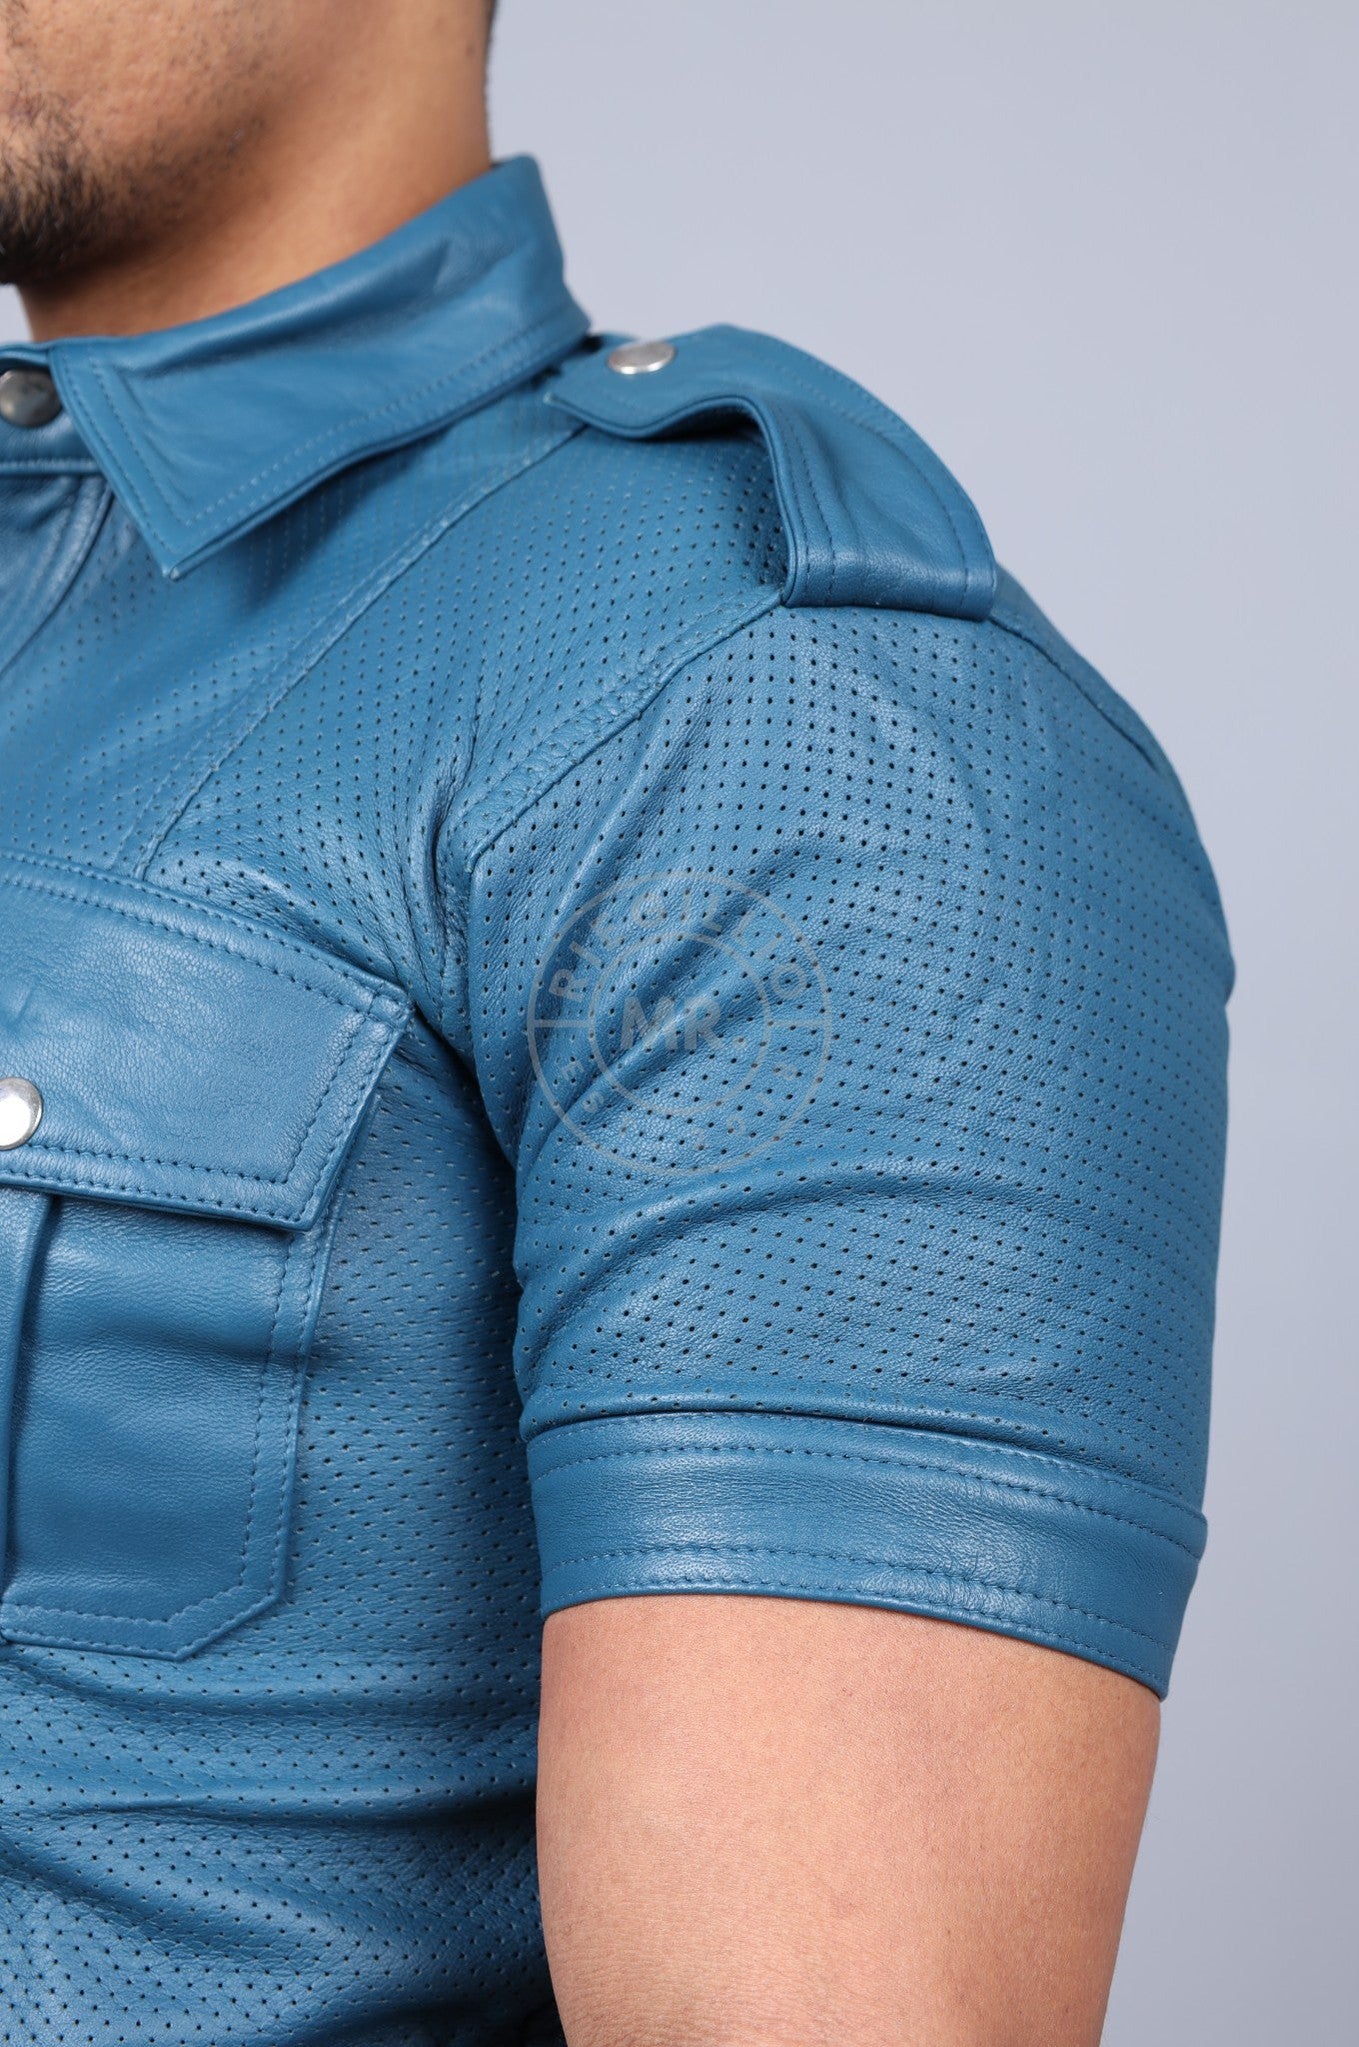 Jeans Blue Leather Perforated Shirt-at MR. Riegillio